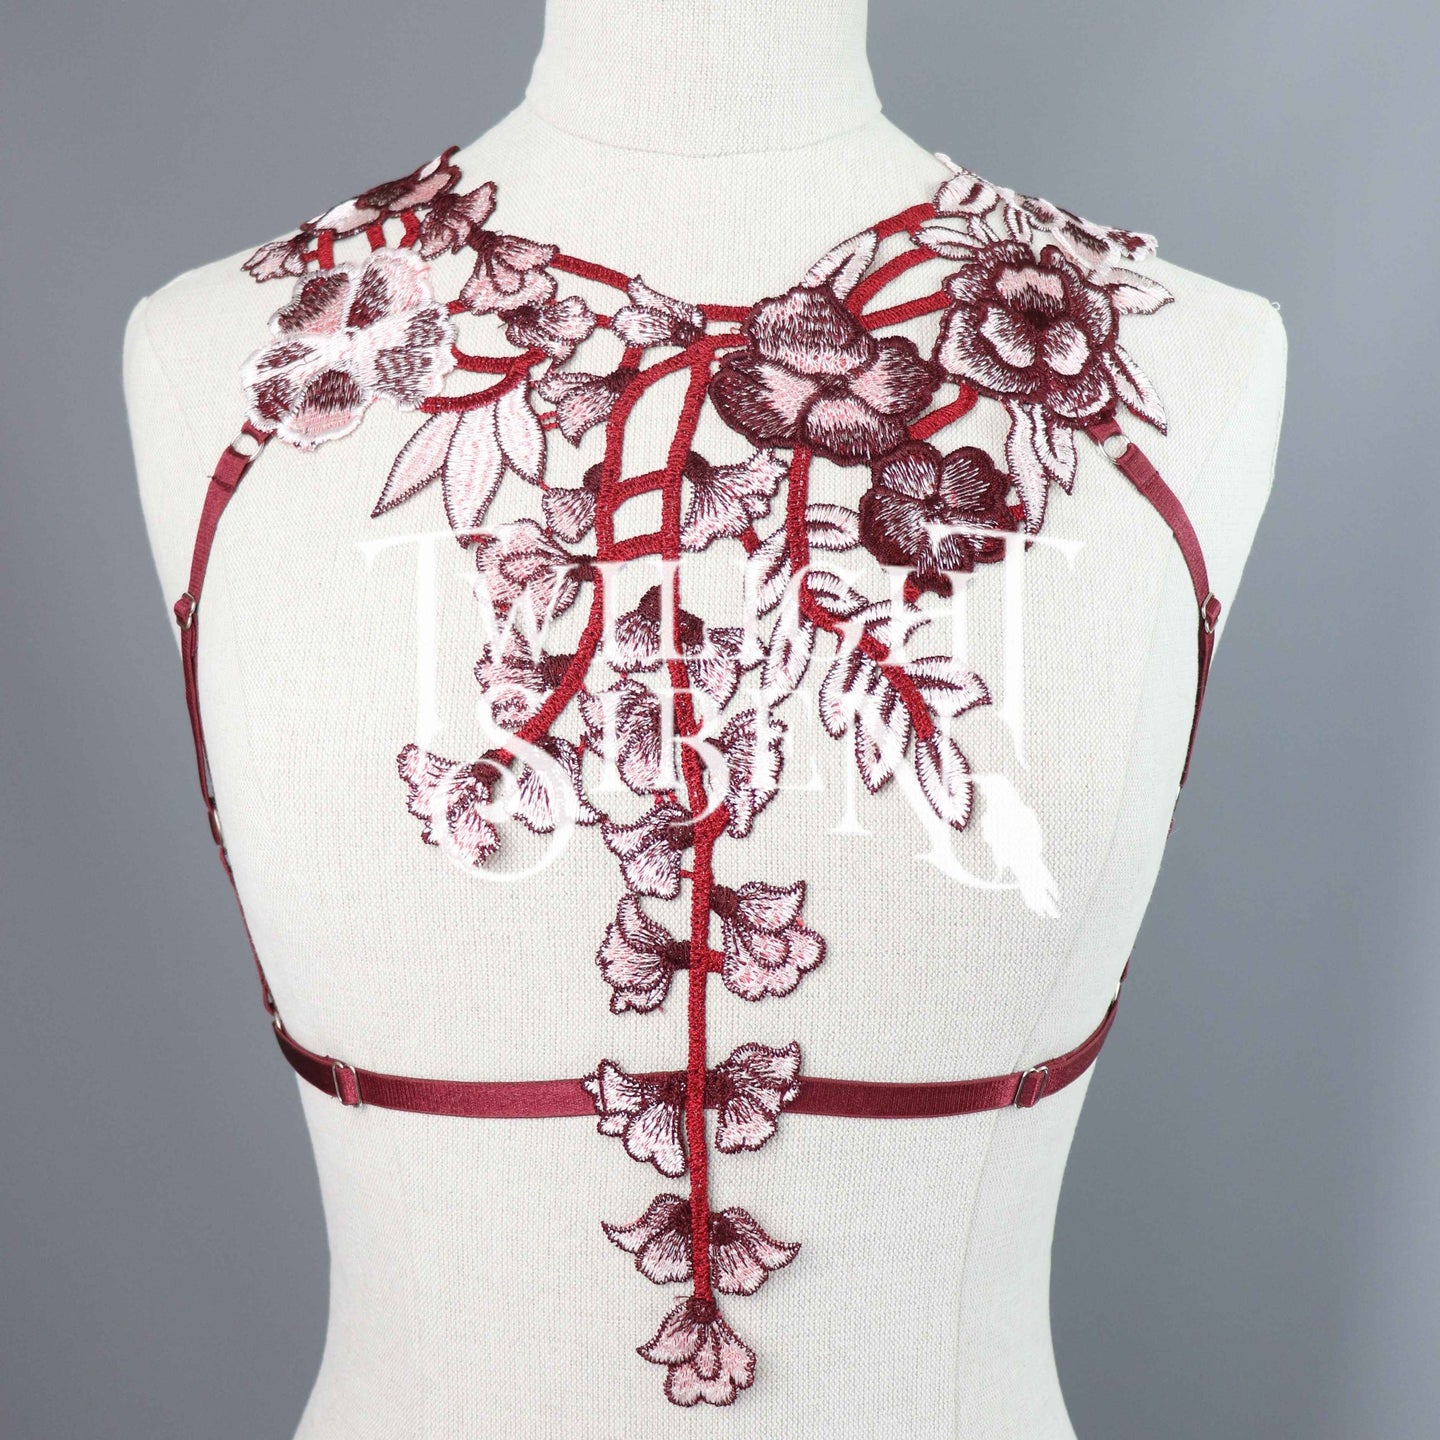 WINE FLORAL LACE BODY HARNESS BRALET - SIZE - SMALL // UK 8-10 // US 4-6
(FITS UNDERBUST / RIBCAGE UP TO  32